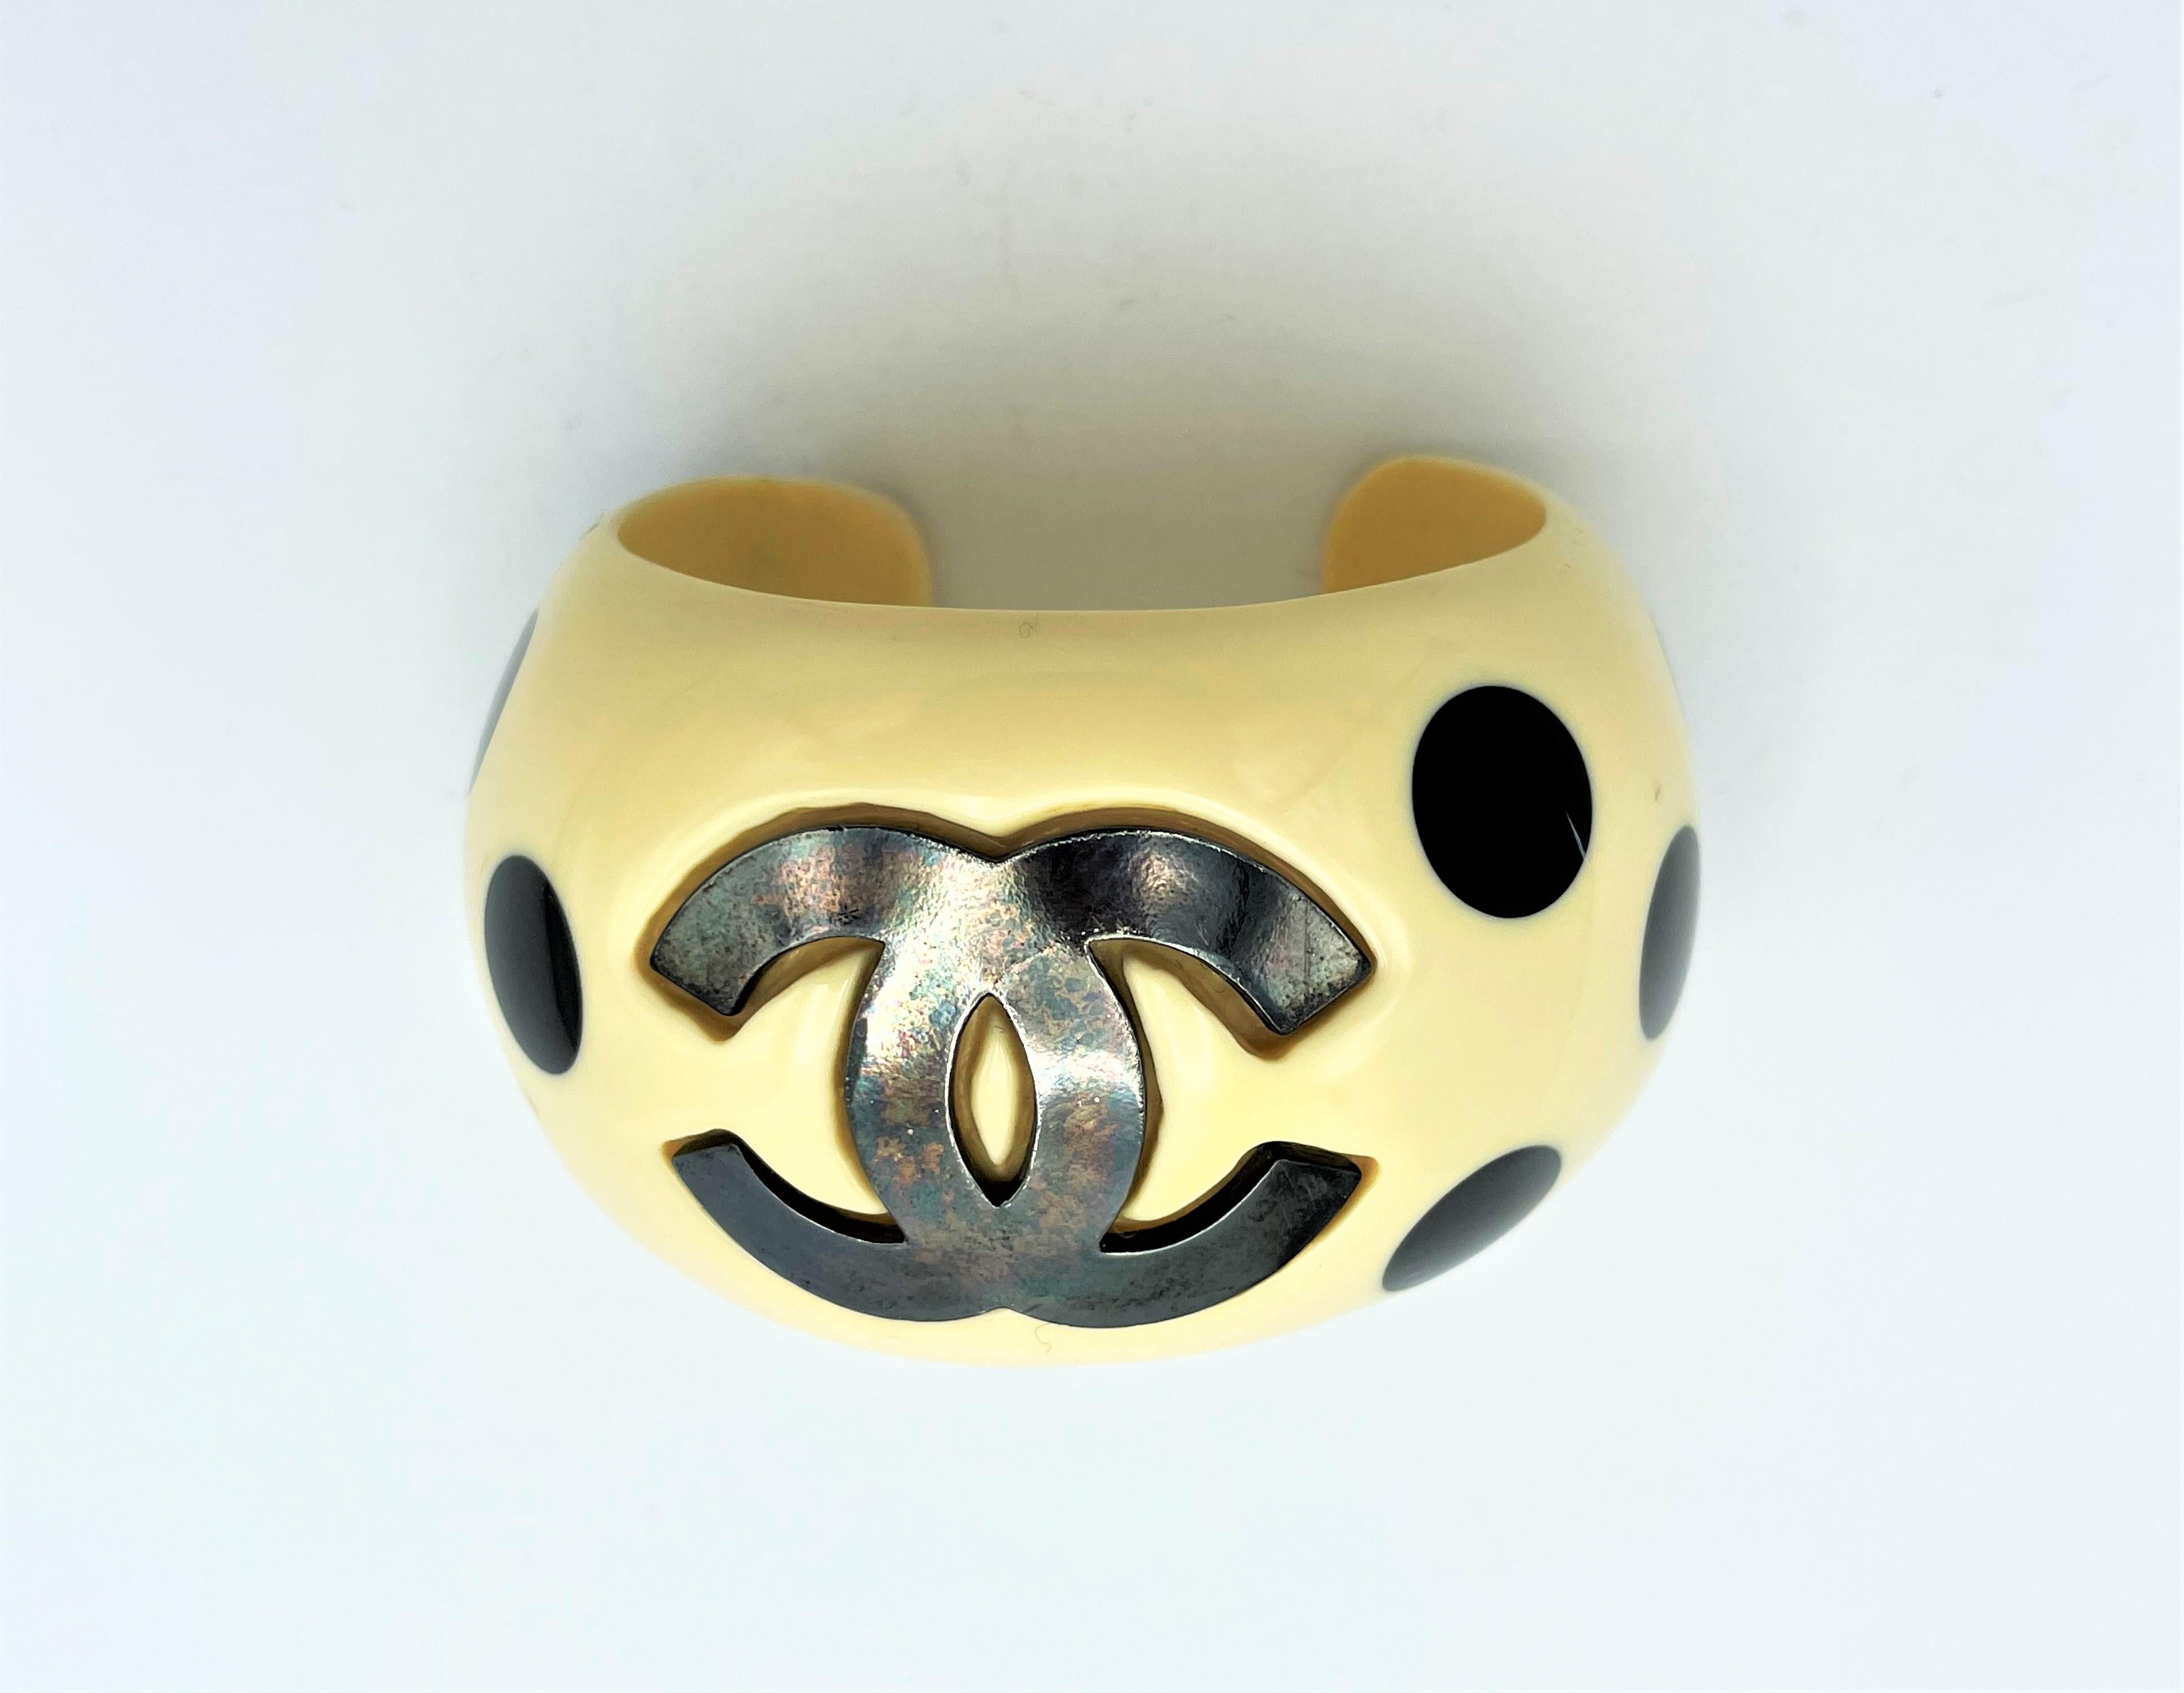 Chanel Cuff/bangle with big CC's and black dots, acryl, signed 96P - 1996 spring For Sale 3